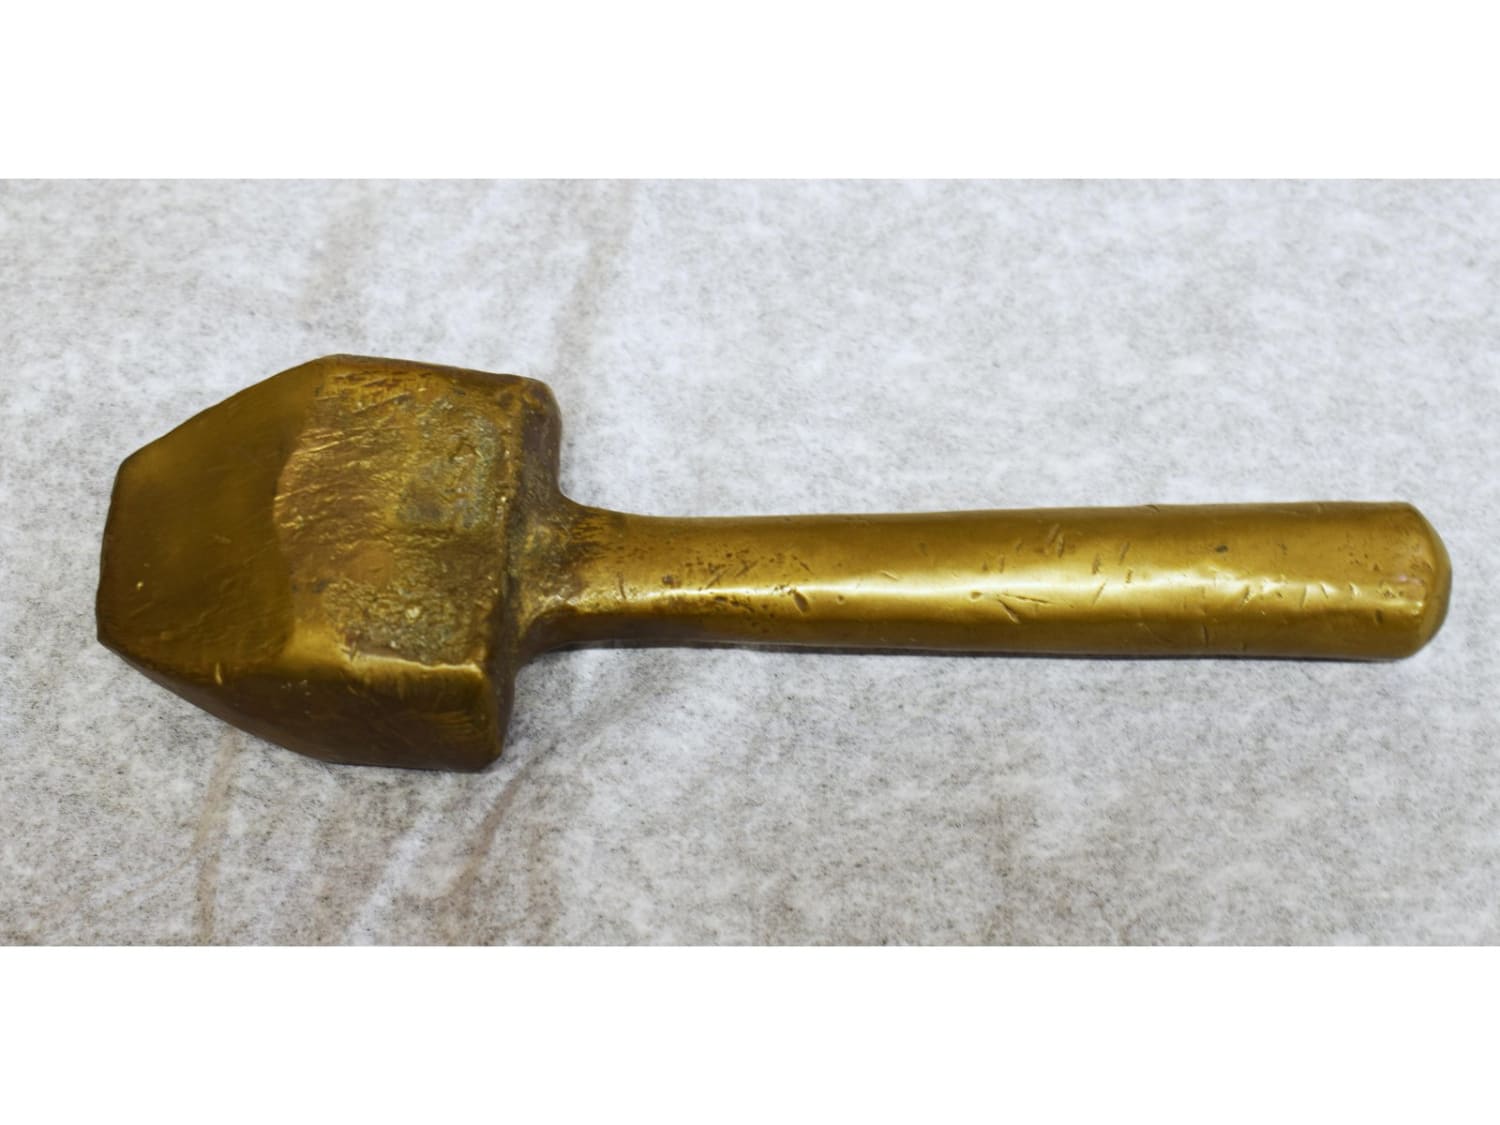 Can You Help Identify This Museum's Mystery Artifacts?